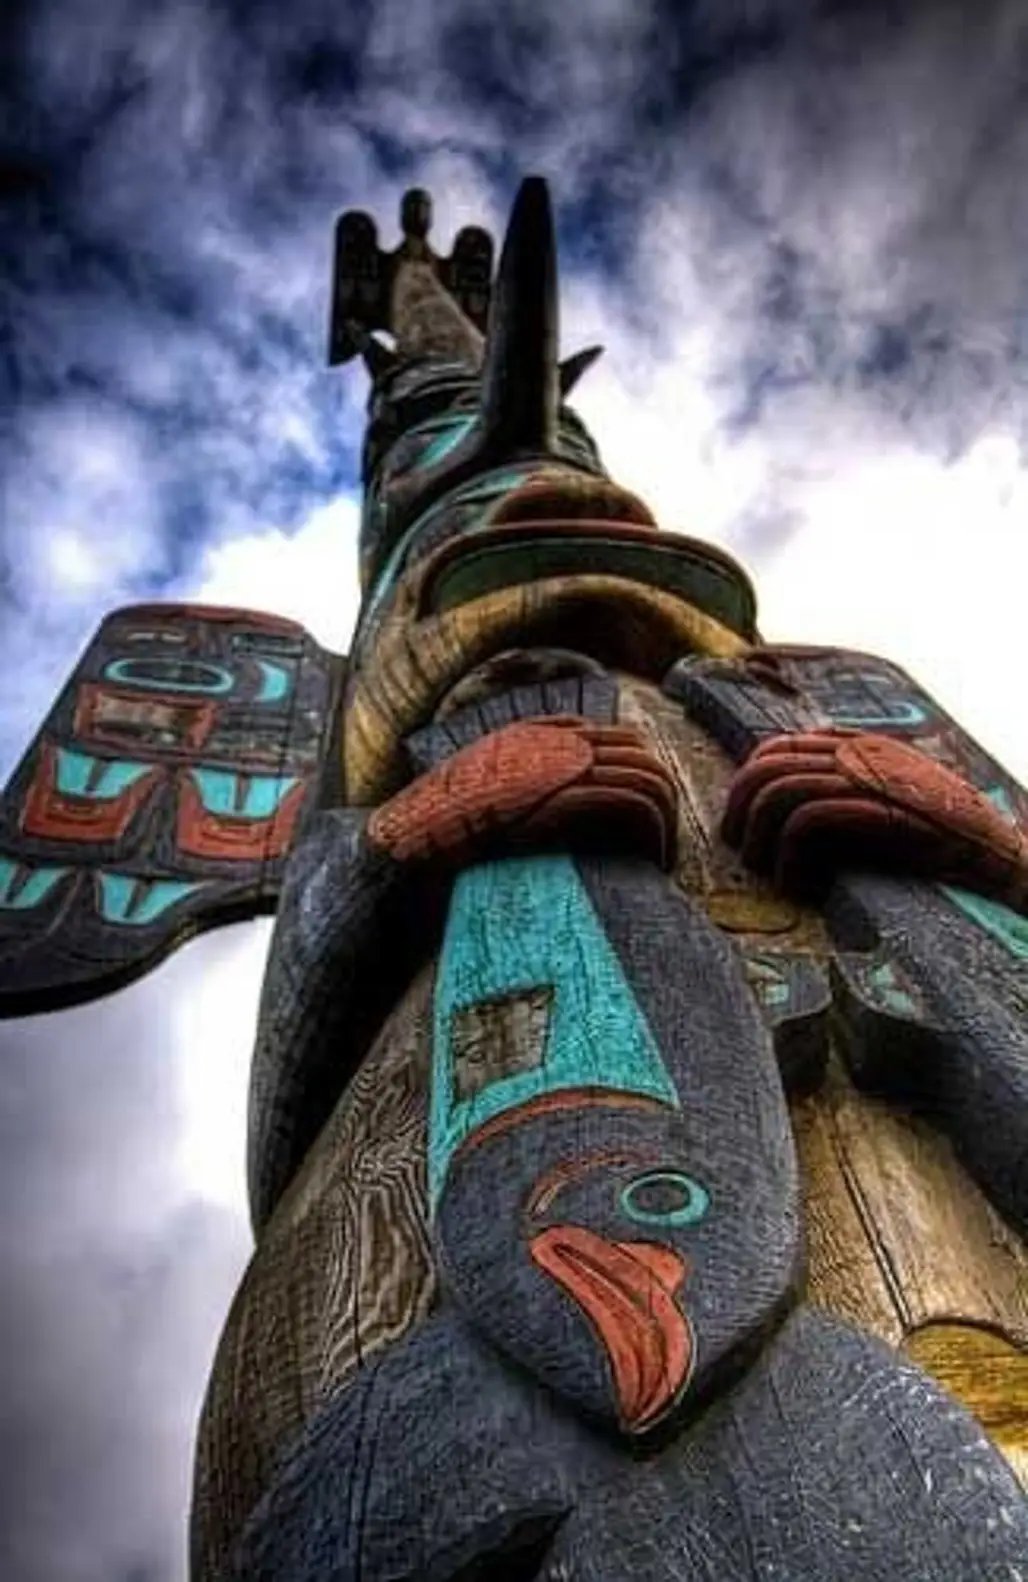 A Totem Pole in Ketchikan